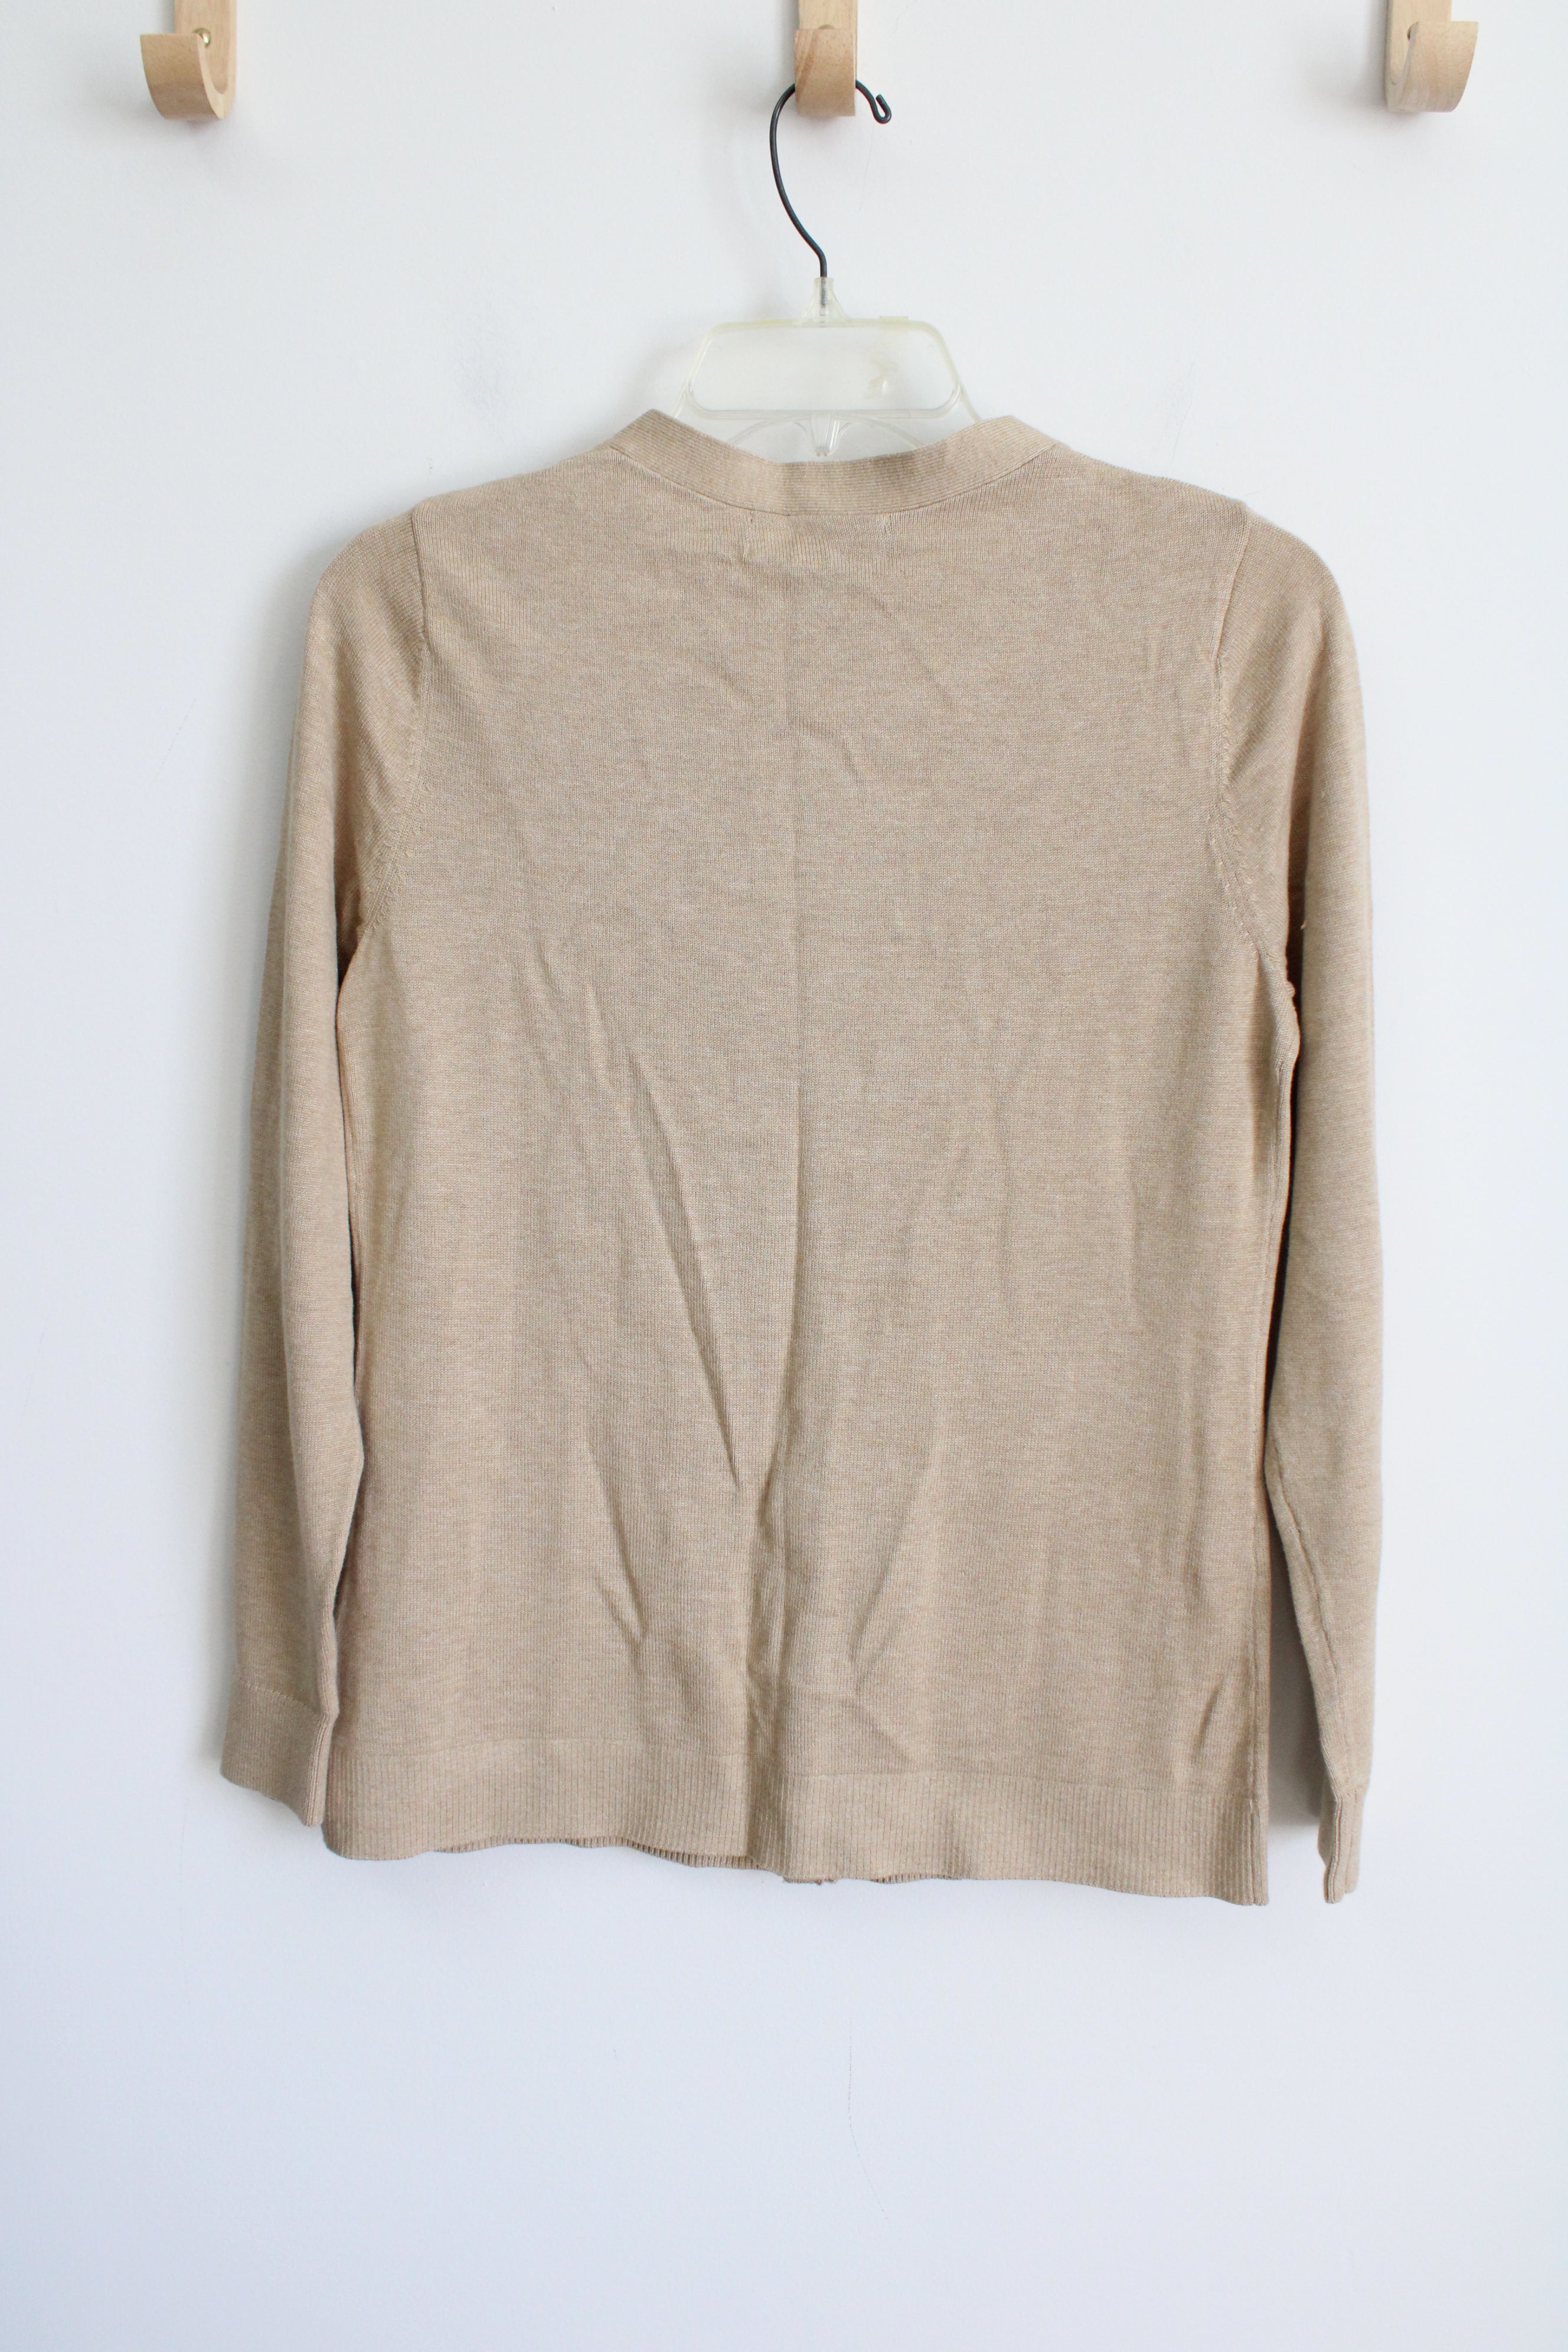 The Outfitters By Lands' End Tan Knit Cardigan | XS